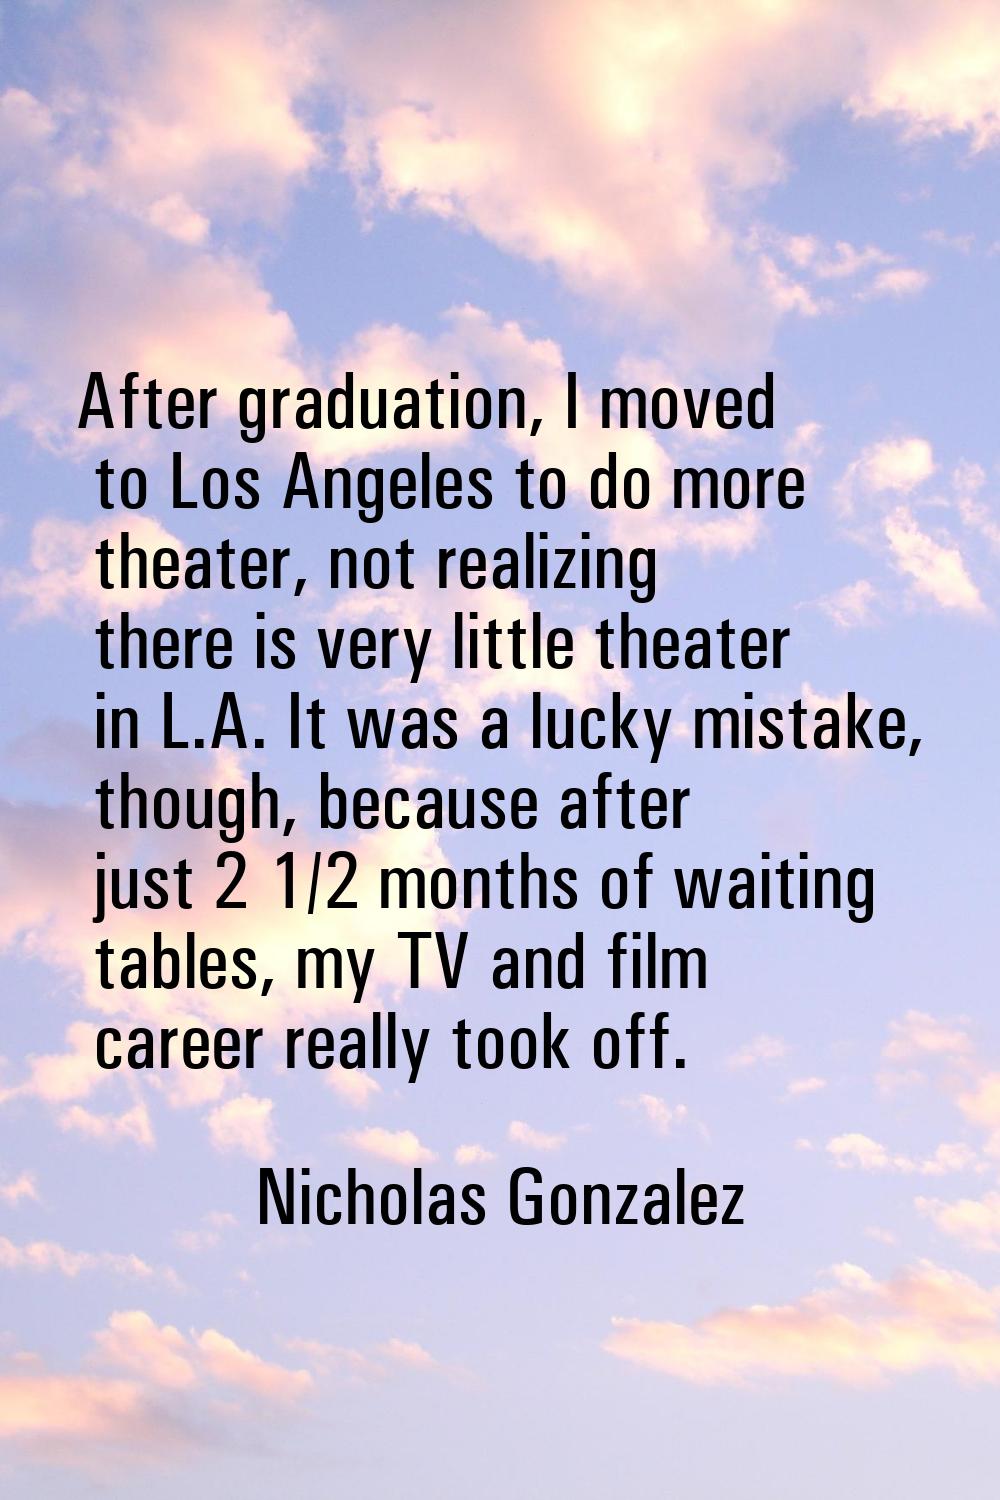 After graduation, I moved to Los Angeles to do more theater, not realizing there is very little the